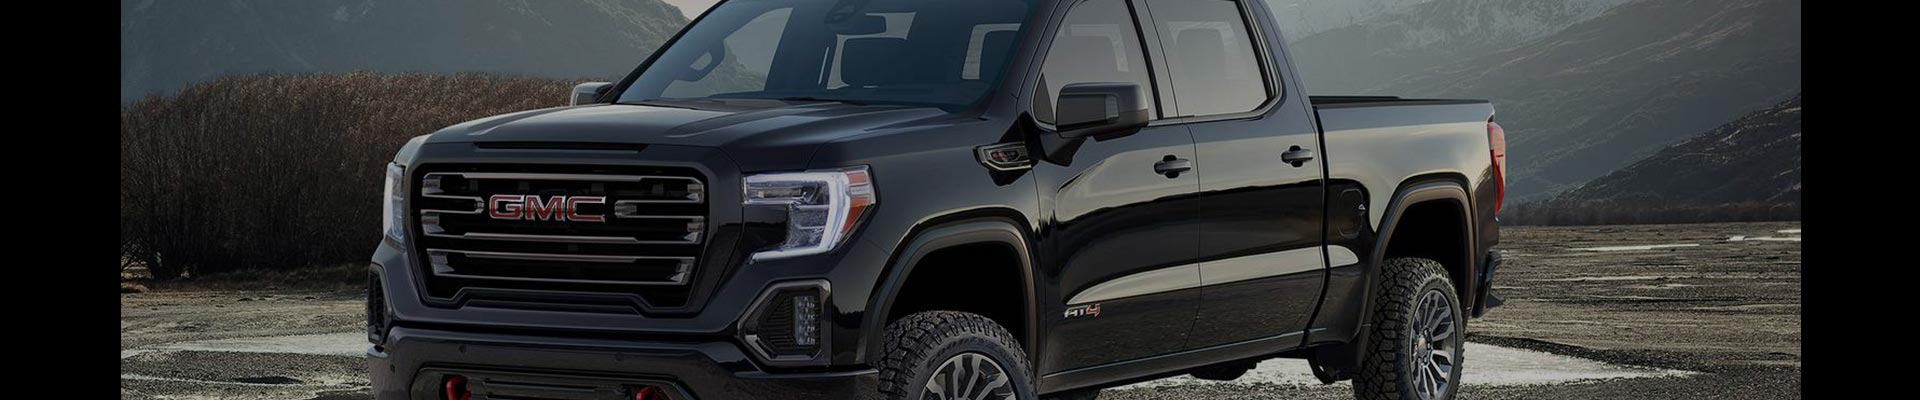 Shop Replacement and OEM GMC Sierra Parts with Discounted Price on the Net